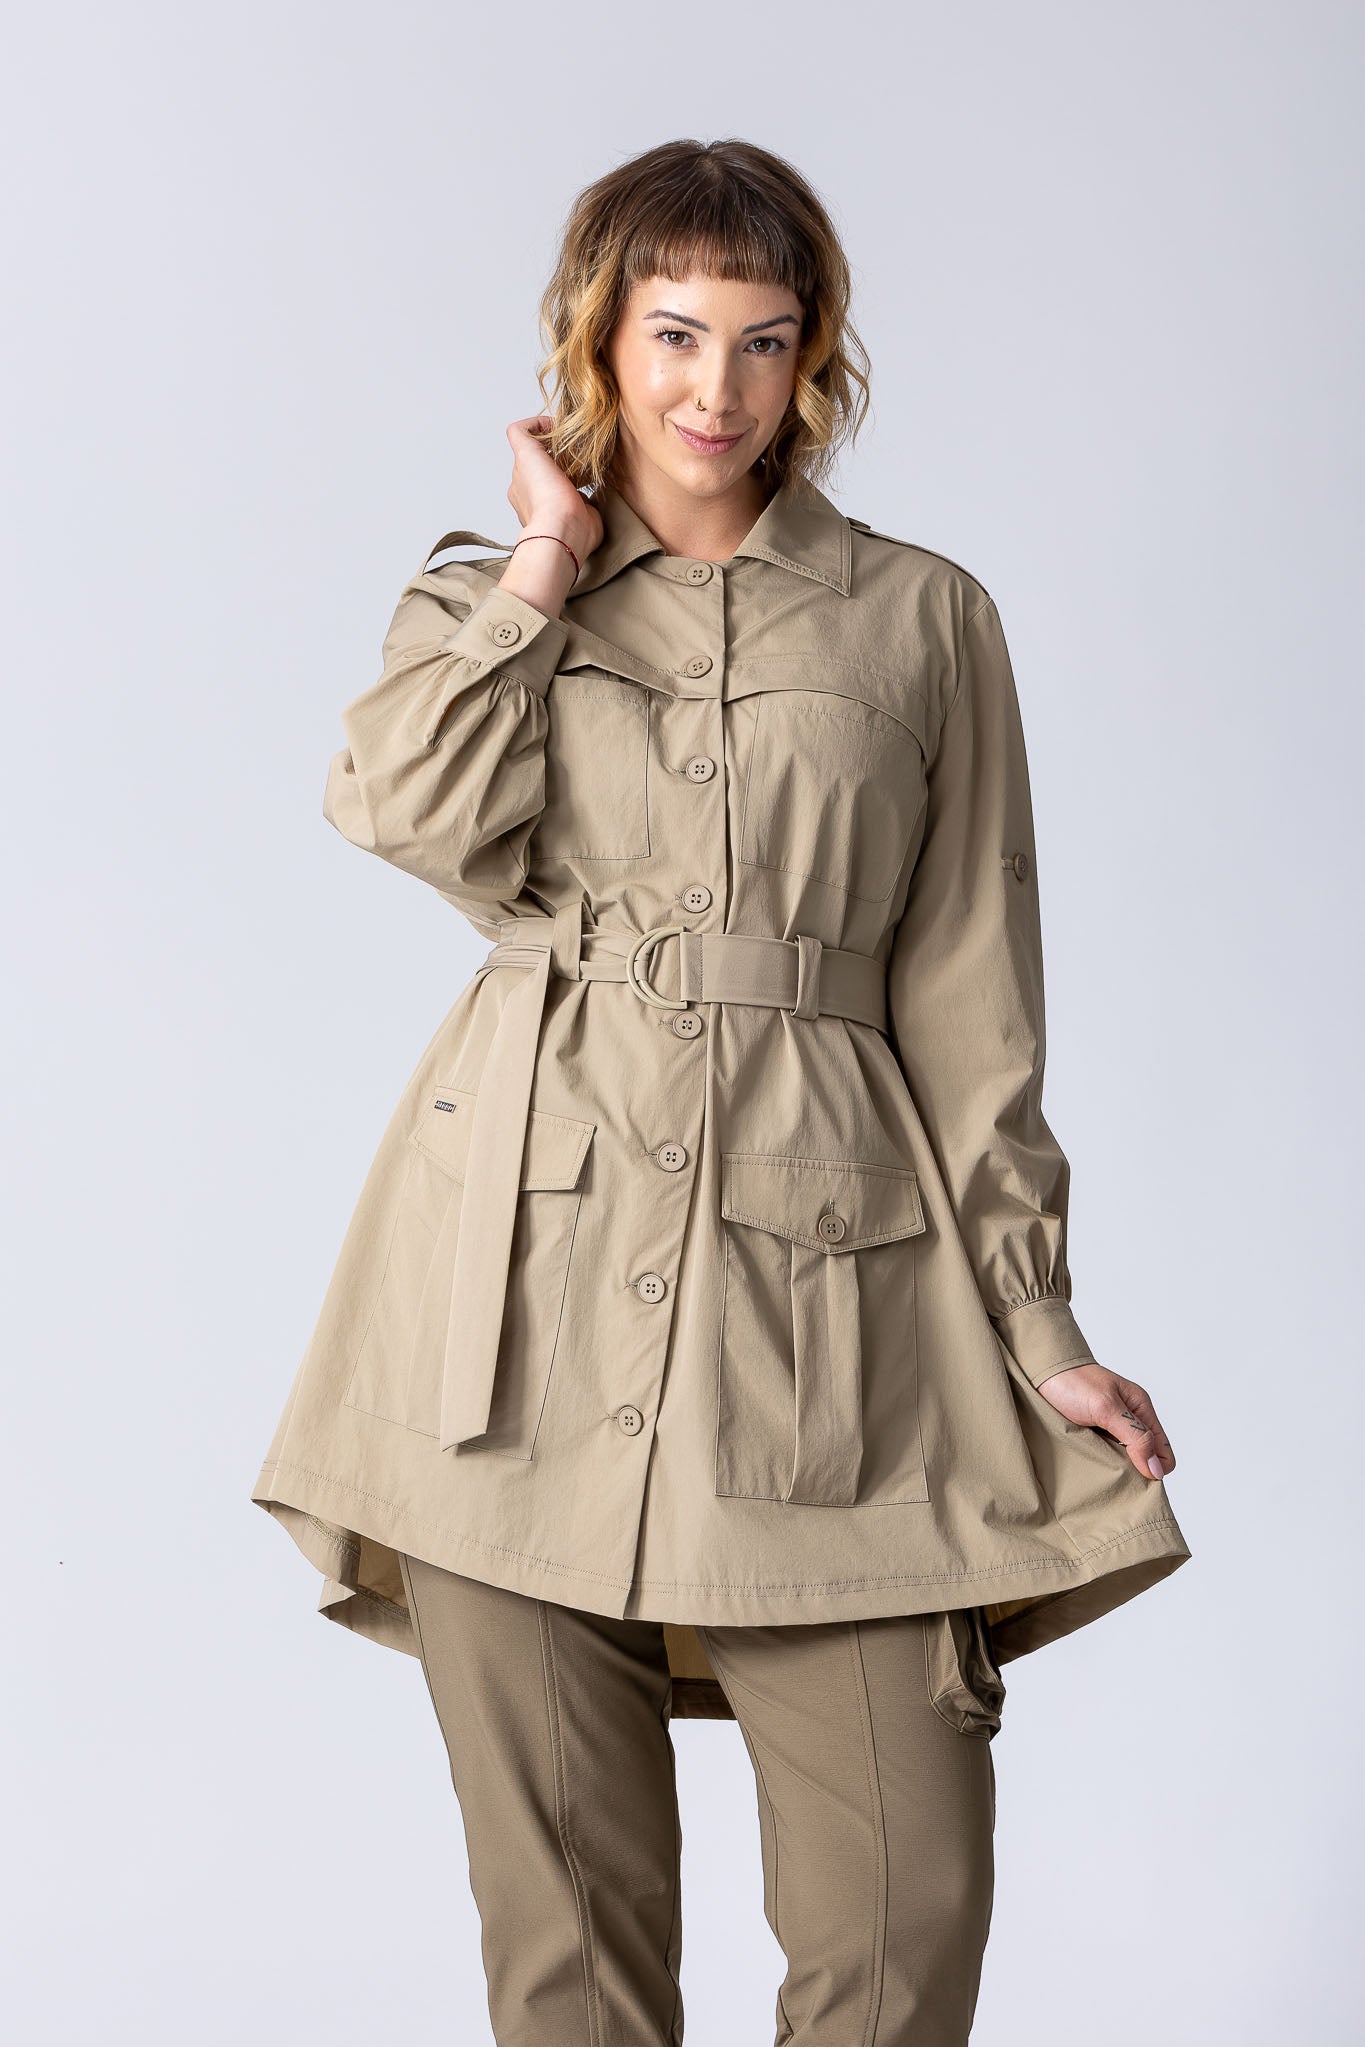 Longline Safari button up shirt dress in beige with large front pockets, waist belt, front check breathability panel and back breathability panel.